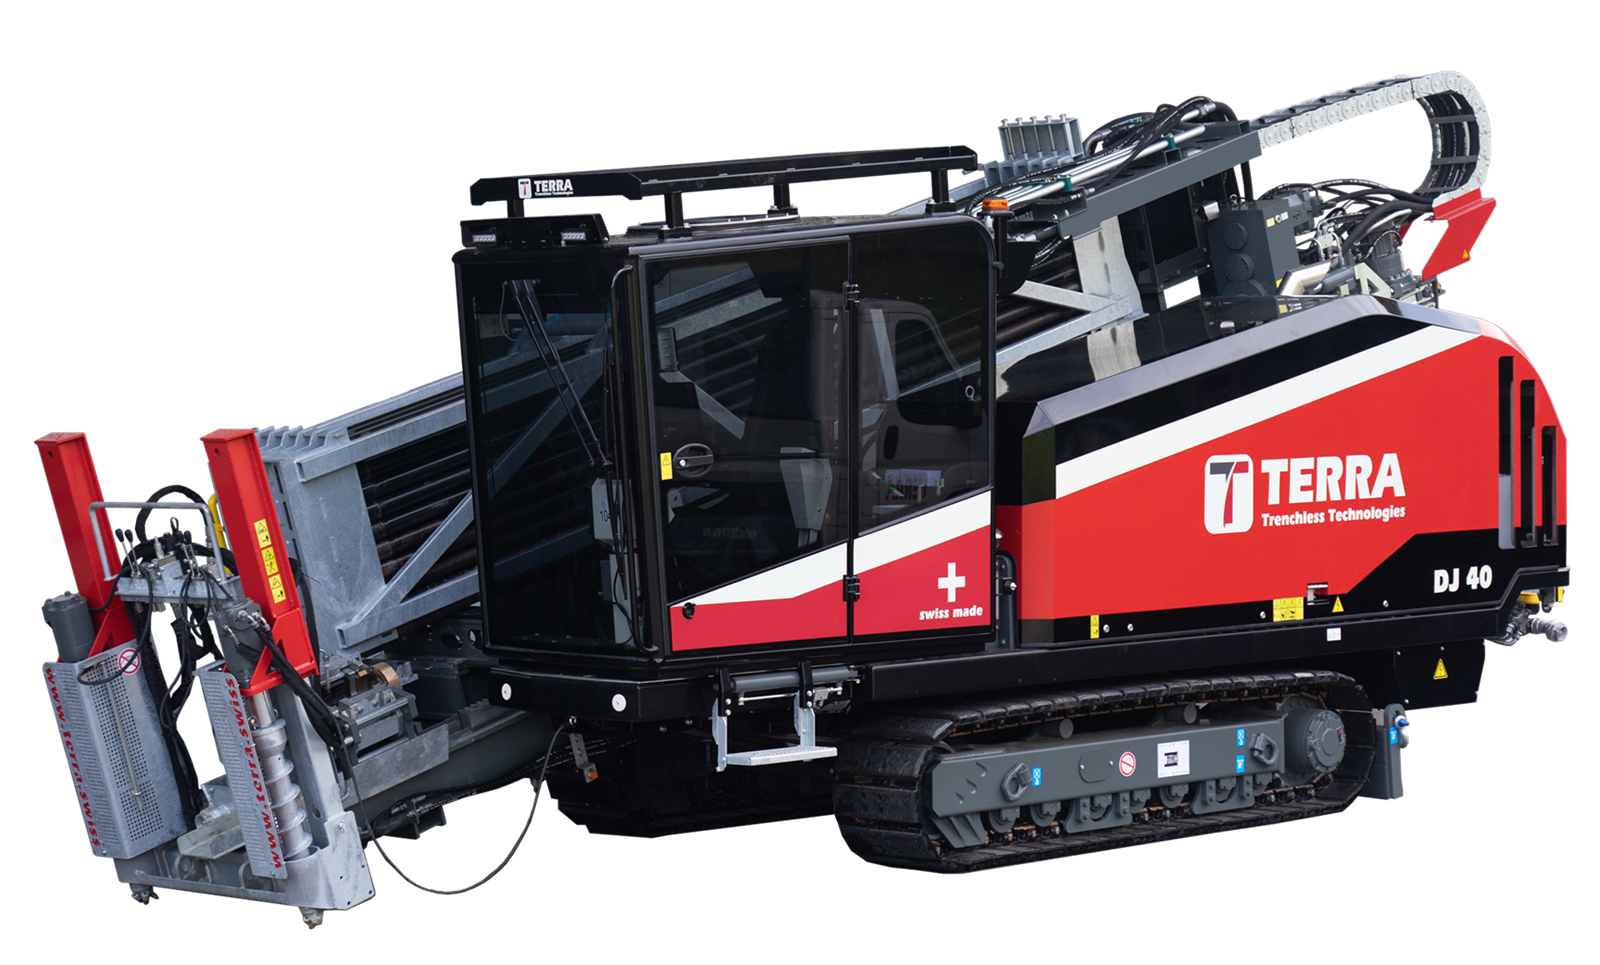 HDD Horizontal Directional Drilling > HDD Machines Crawler > 